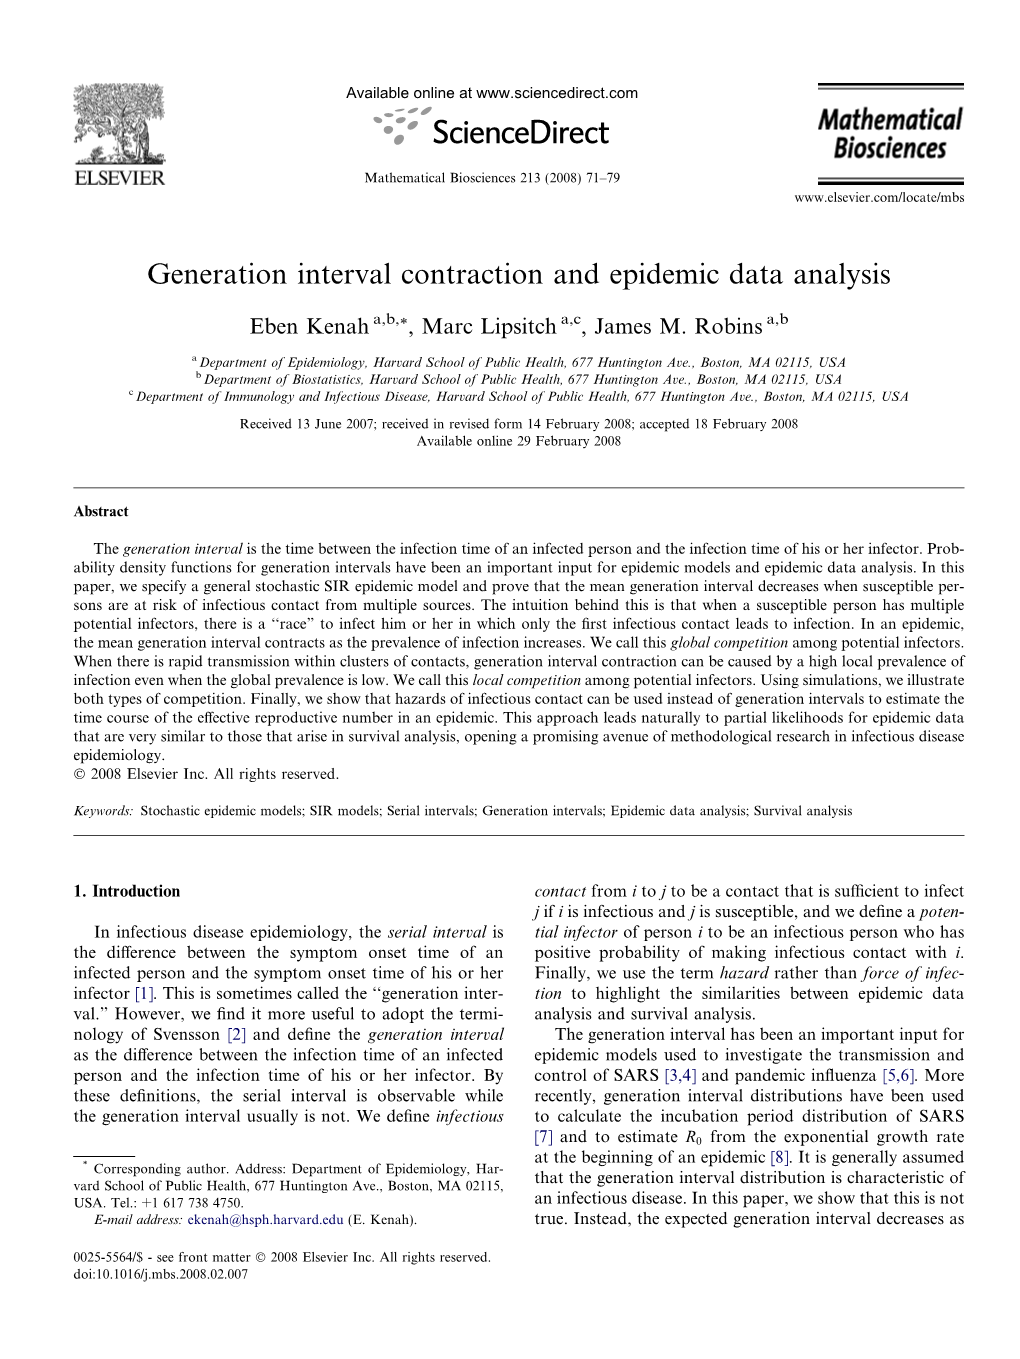 Generation Interval Contraction and Epidemic Data Analysis